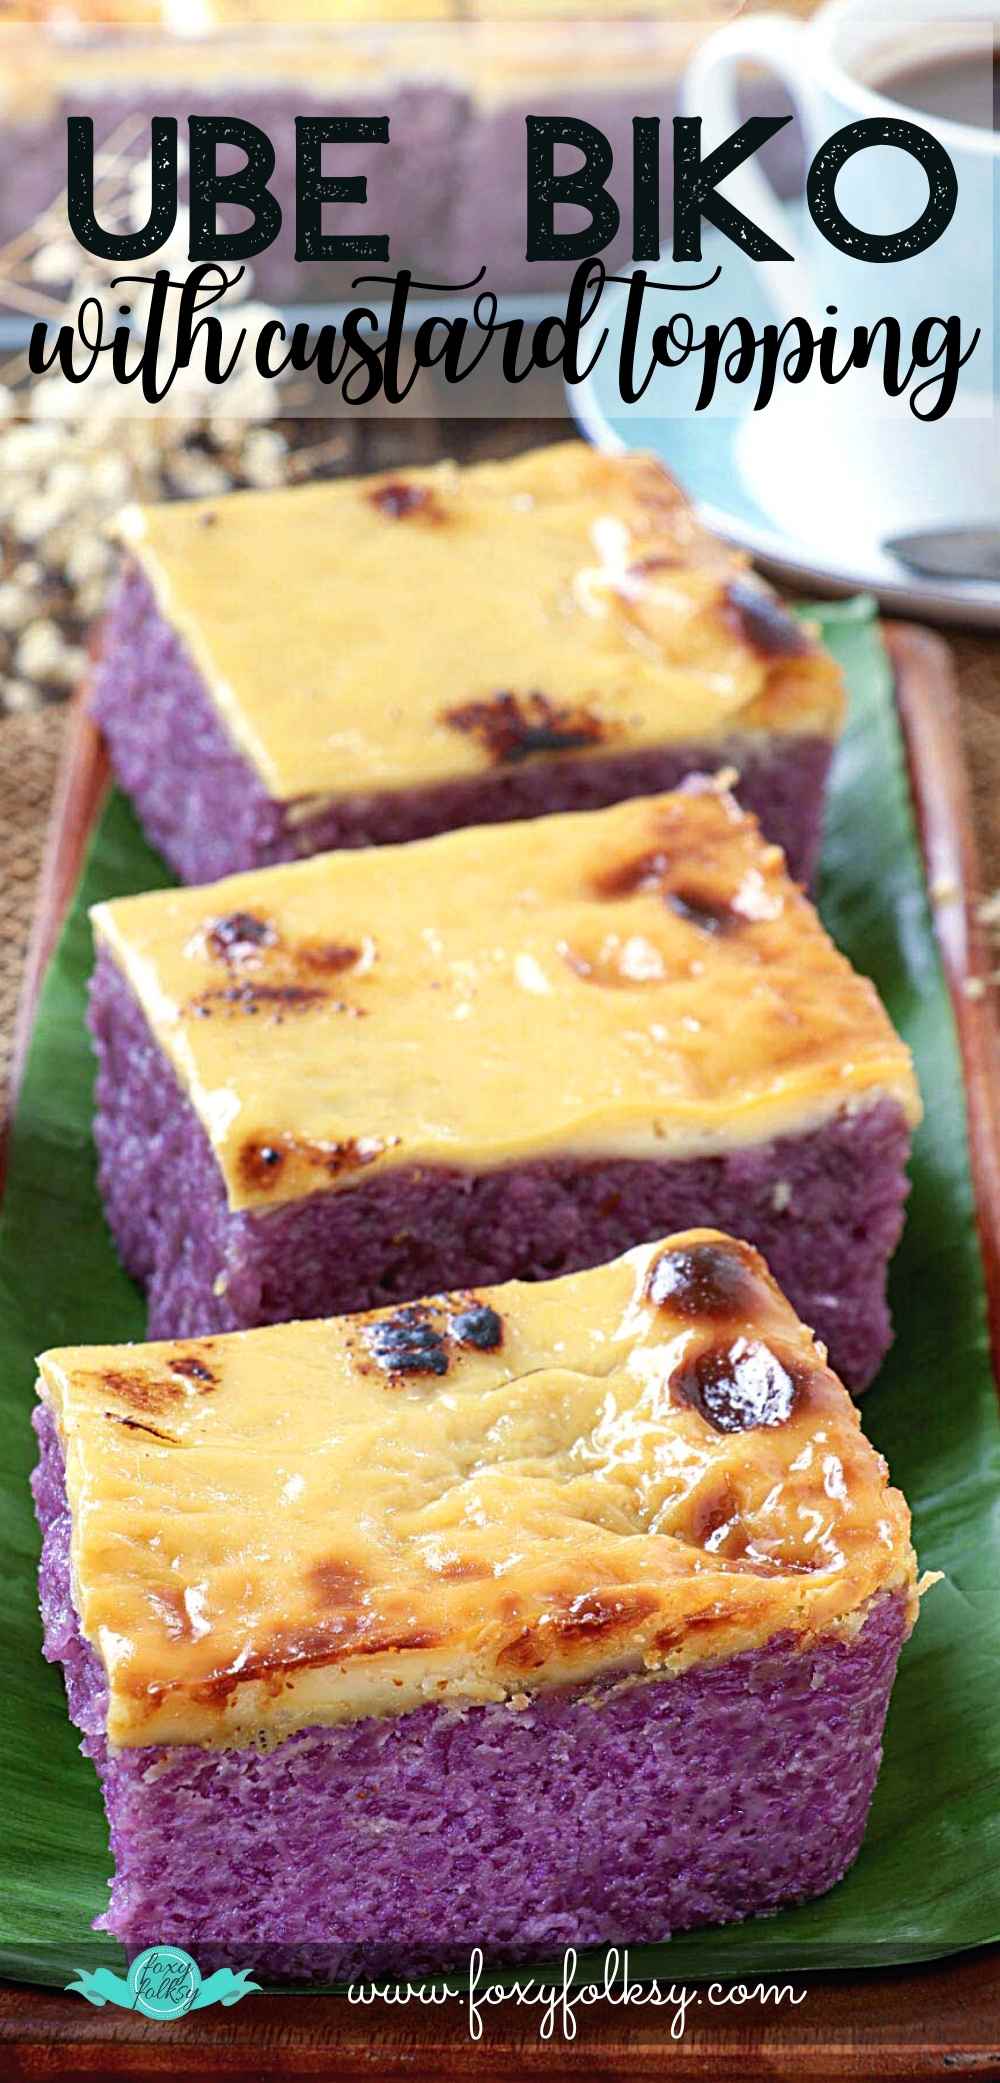 Sticky rice cake with purple yam or ube, topped with custard.